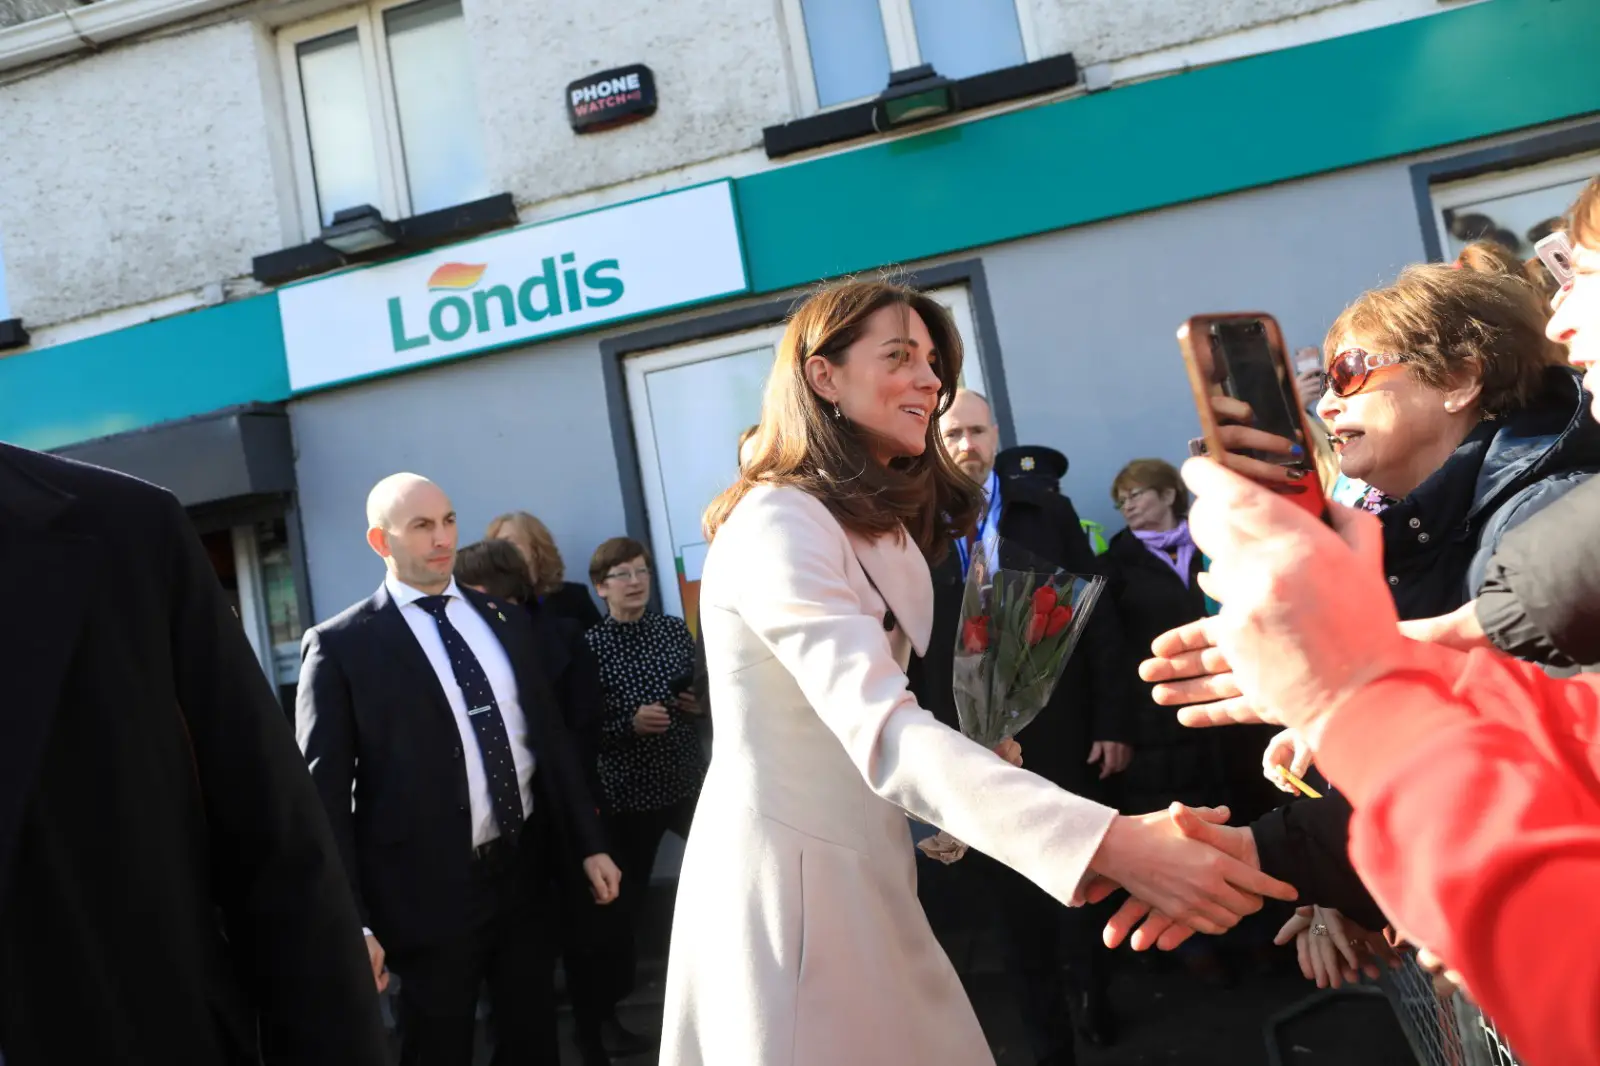 The Duchess of Cambridge during a walkabout in Ireland